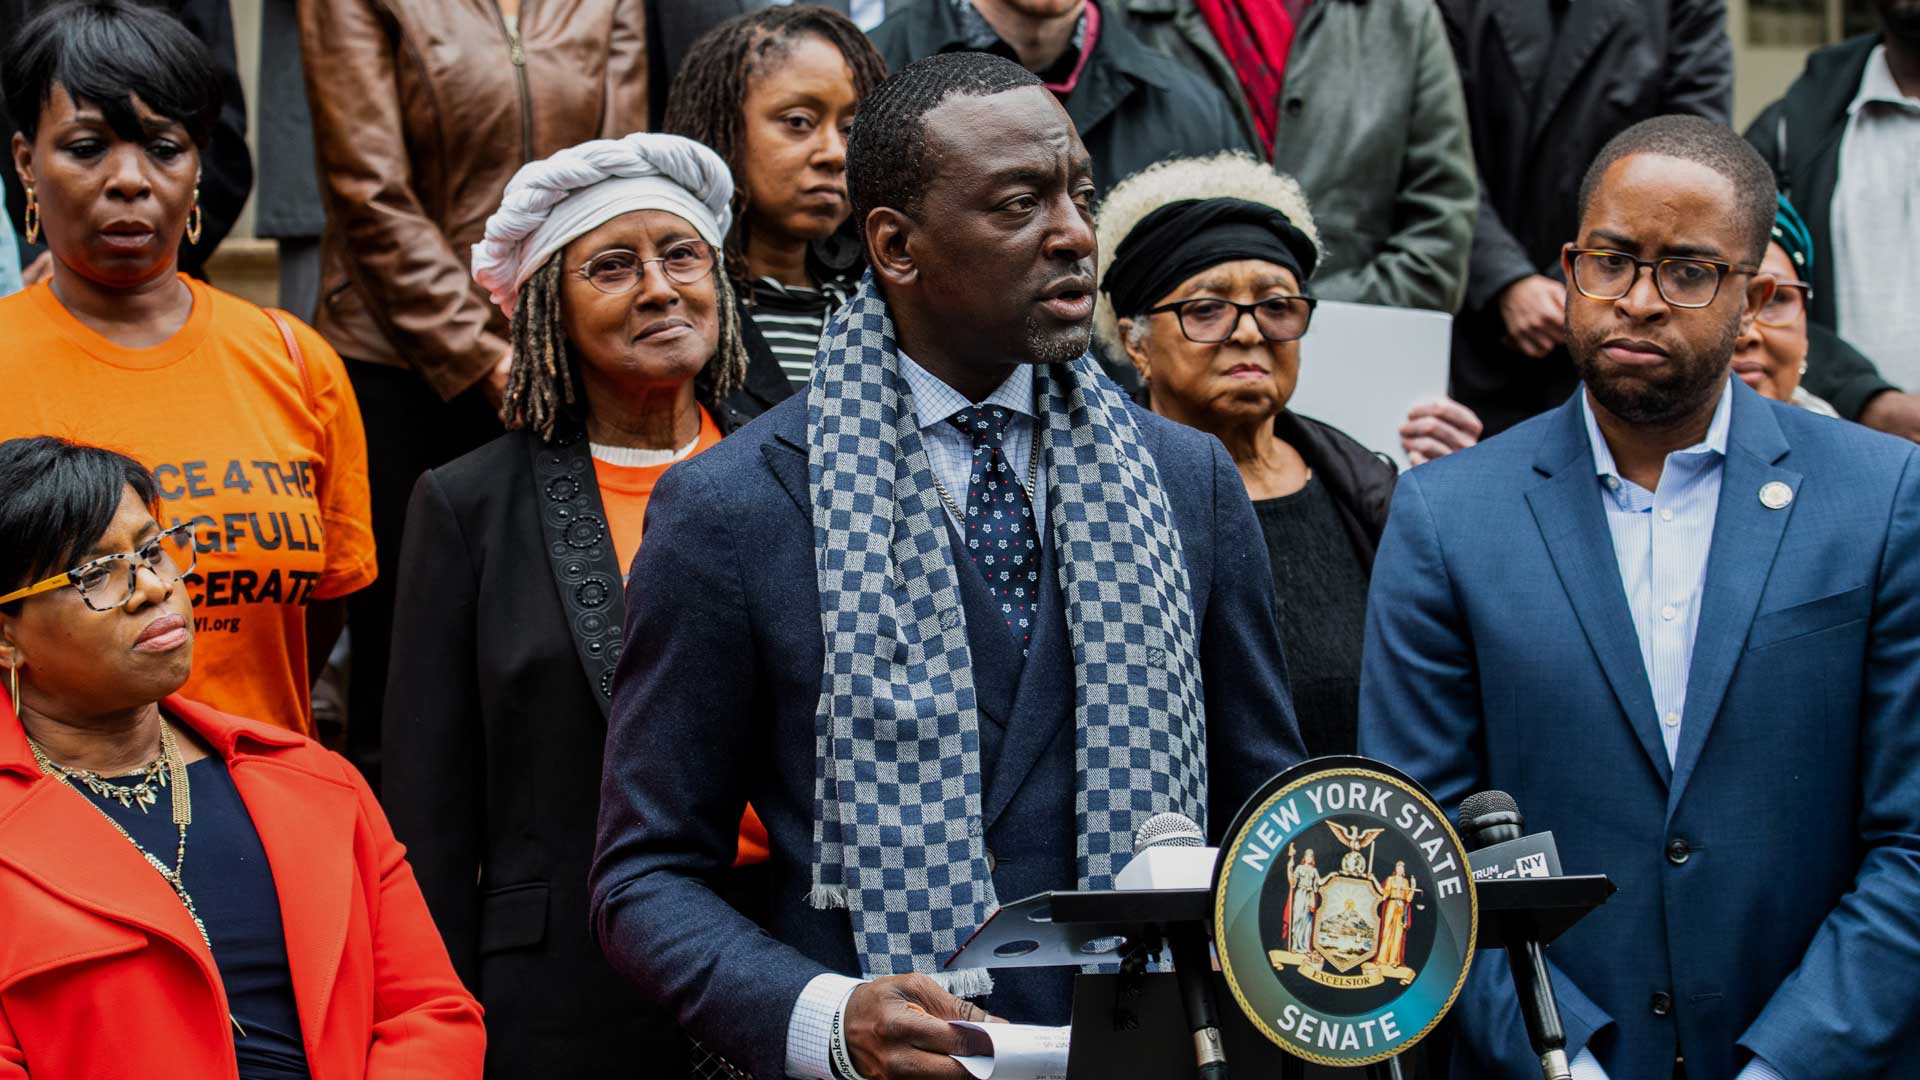 Dr. Yusef Salaam on Oct. 29, 2019 in New York. (Larry Busacca/AP Images for the Innocence Project)